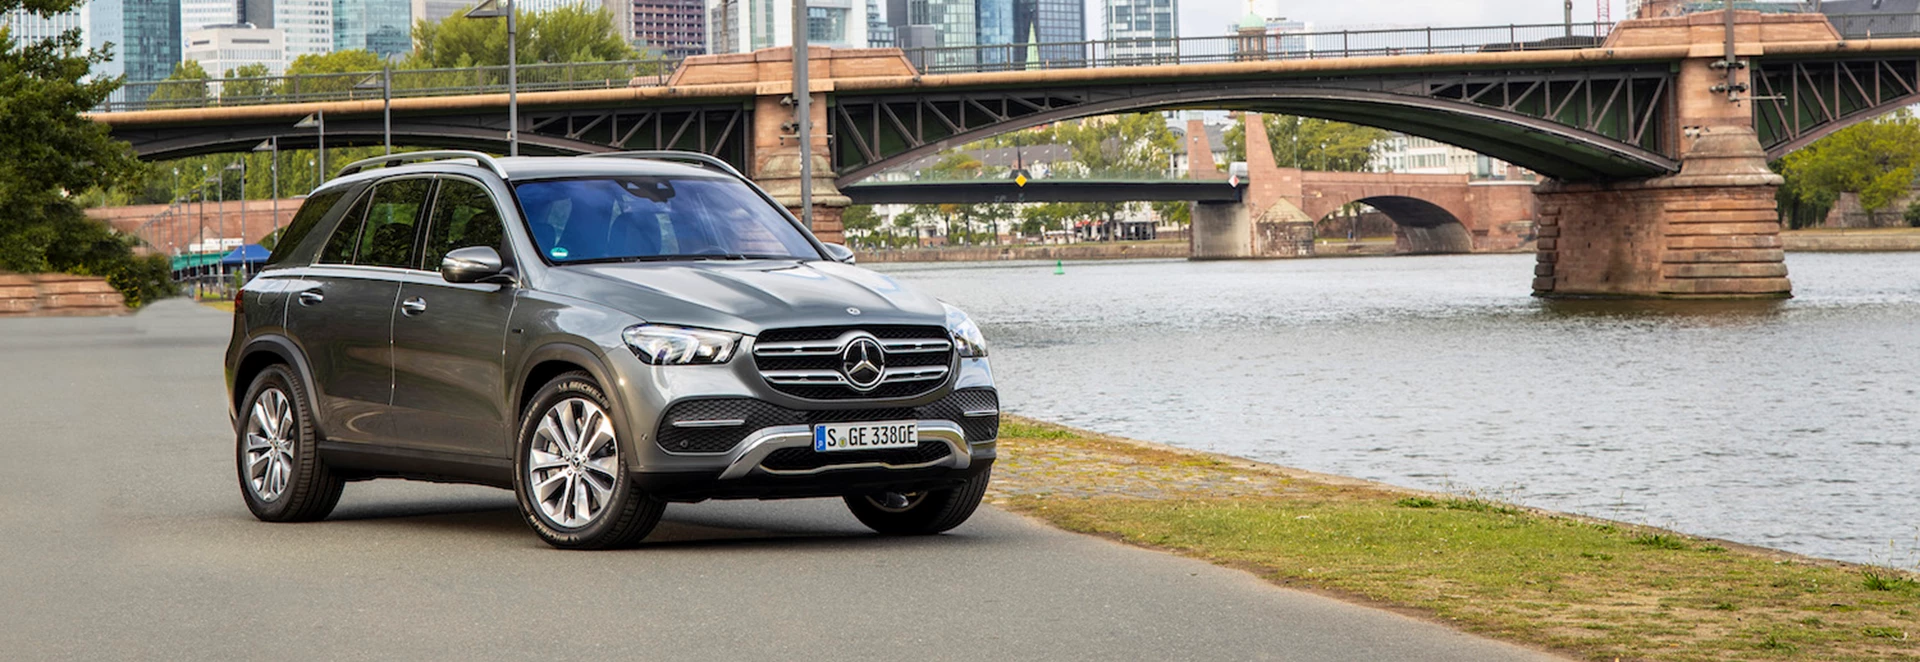 Mercedes-Benz reveals two new plug-in hybrid SUVs